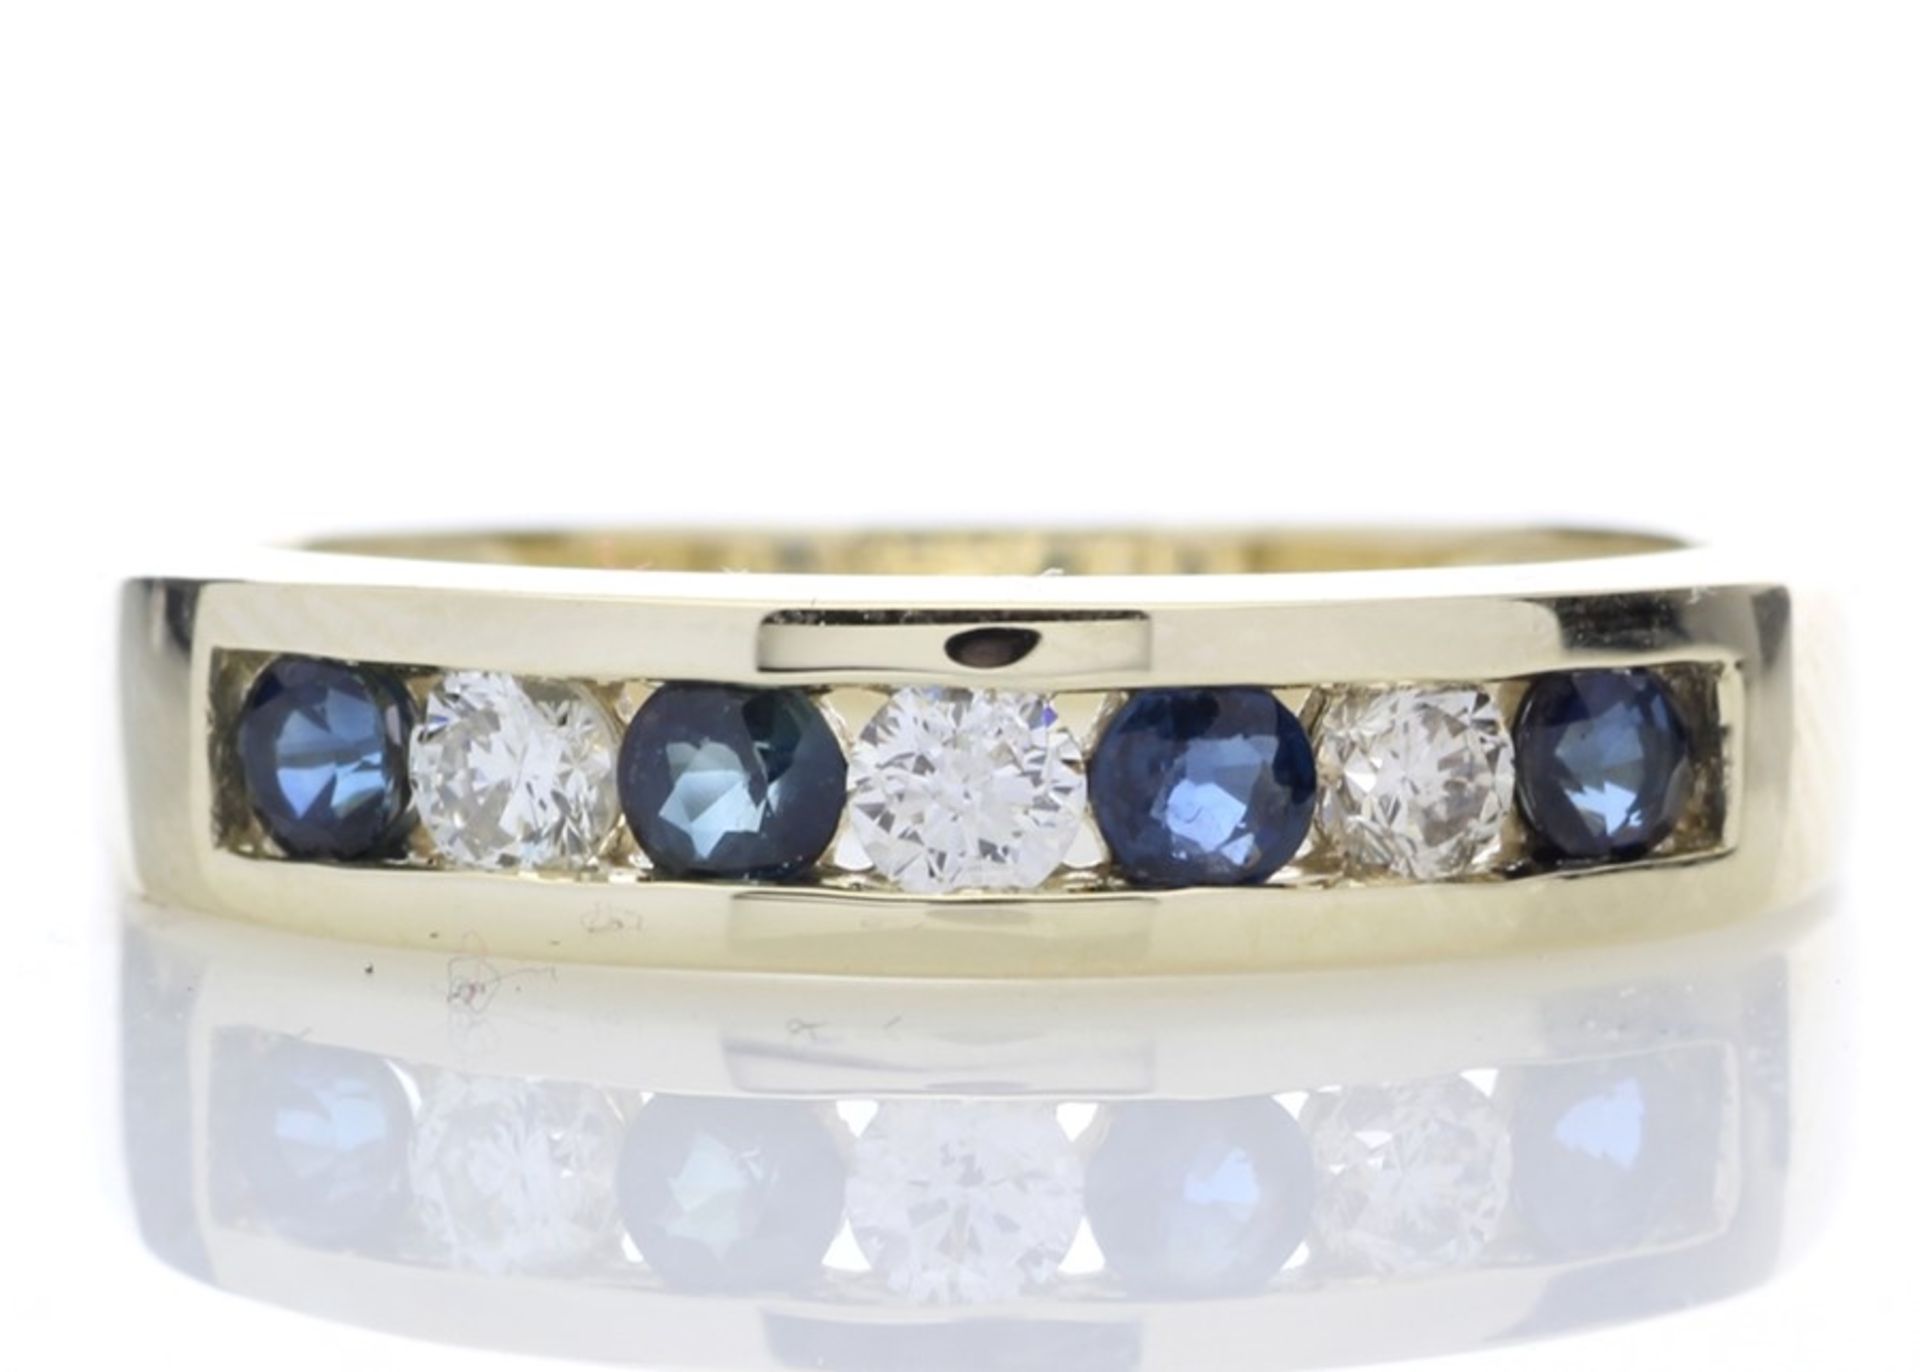 Valued by GIE £2,945.00 - 9ct Yellow Gold Channel Set Semi Eternity Diamond Ring 0.25 (Sapphire)